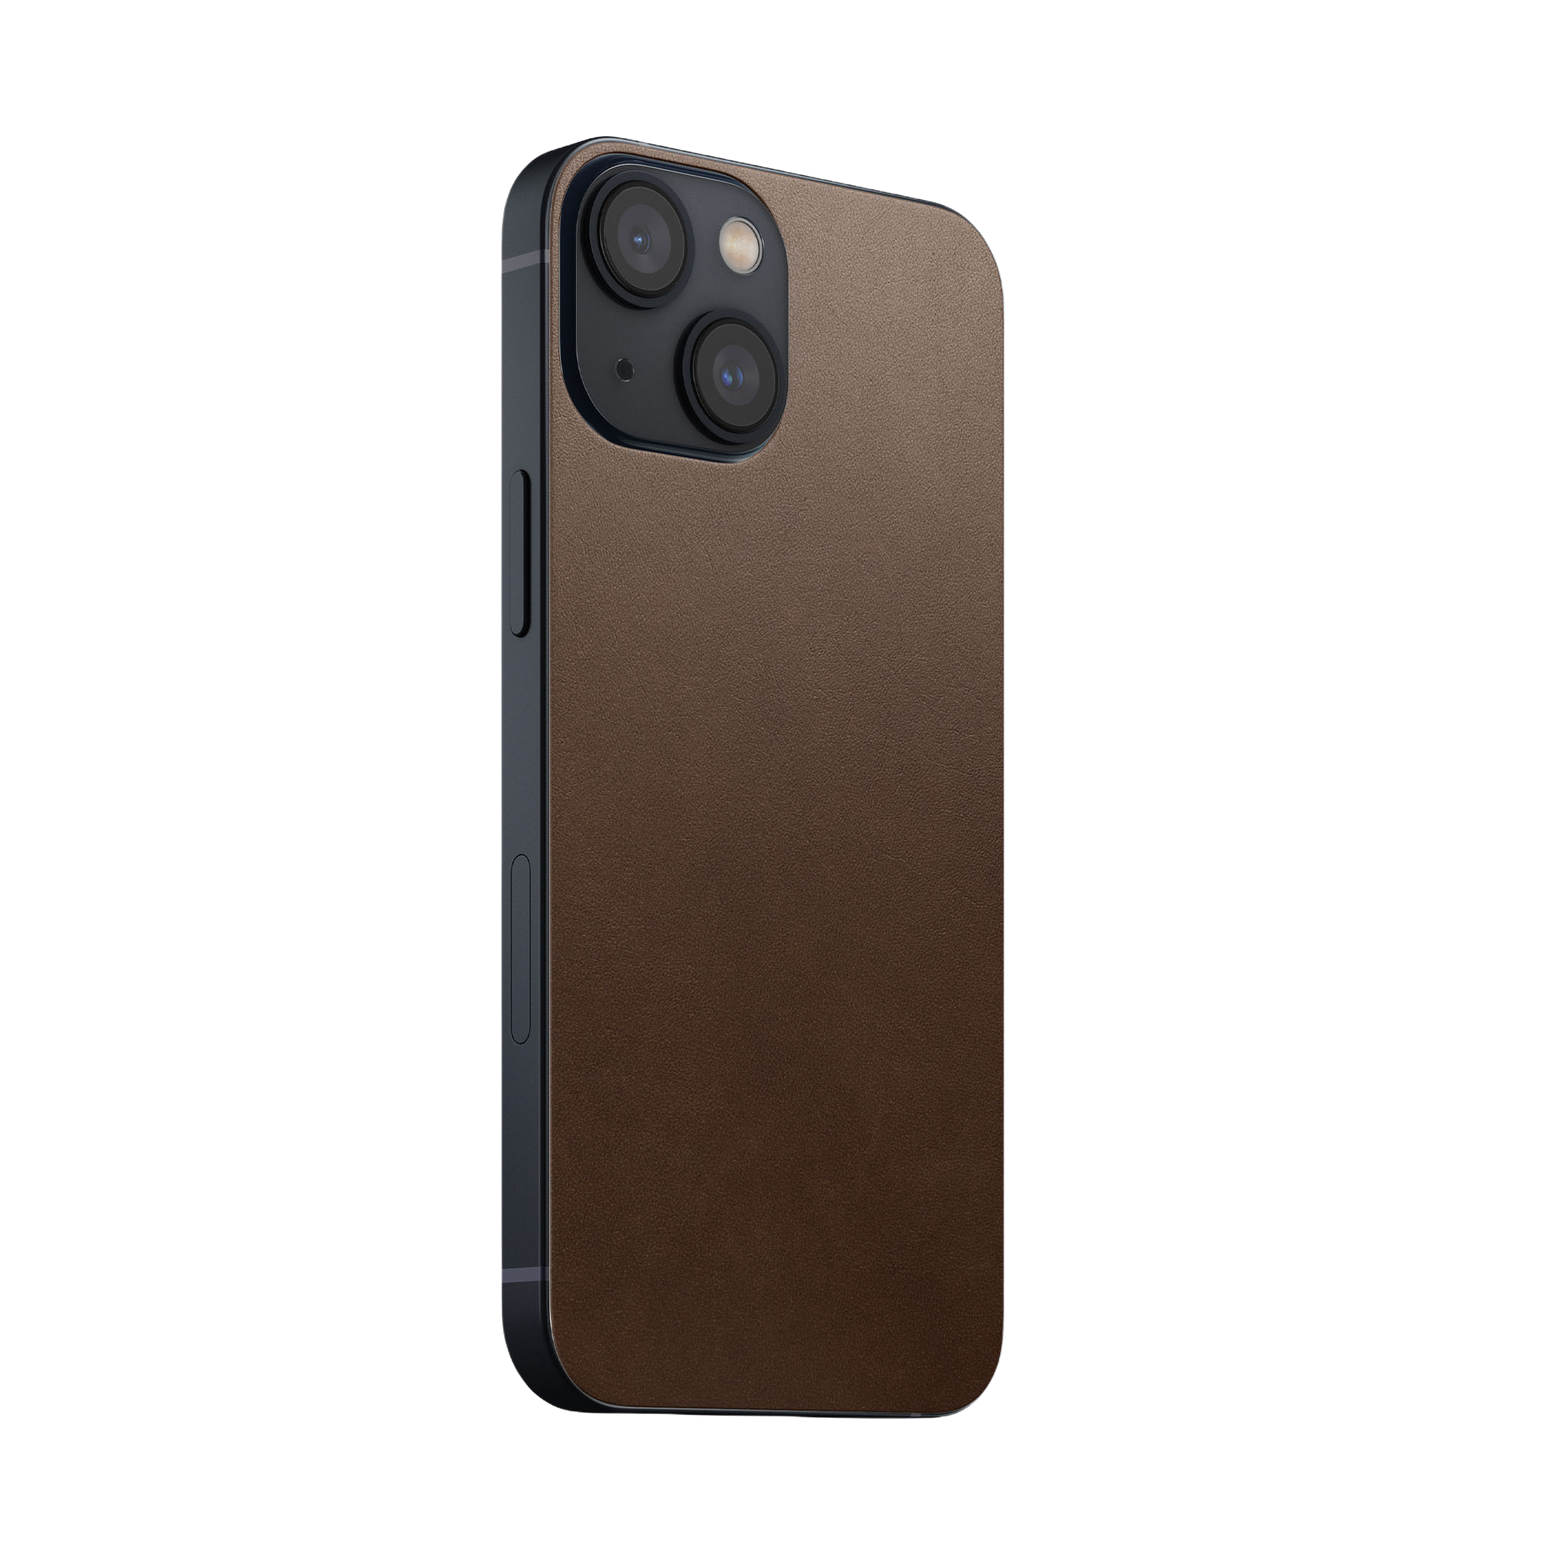 Nomad Skin with Horween Leather for iPhone 13 mini - Rustic Brown - Discontinued